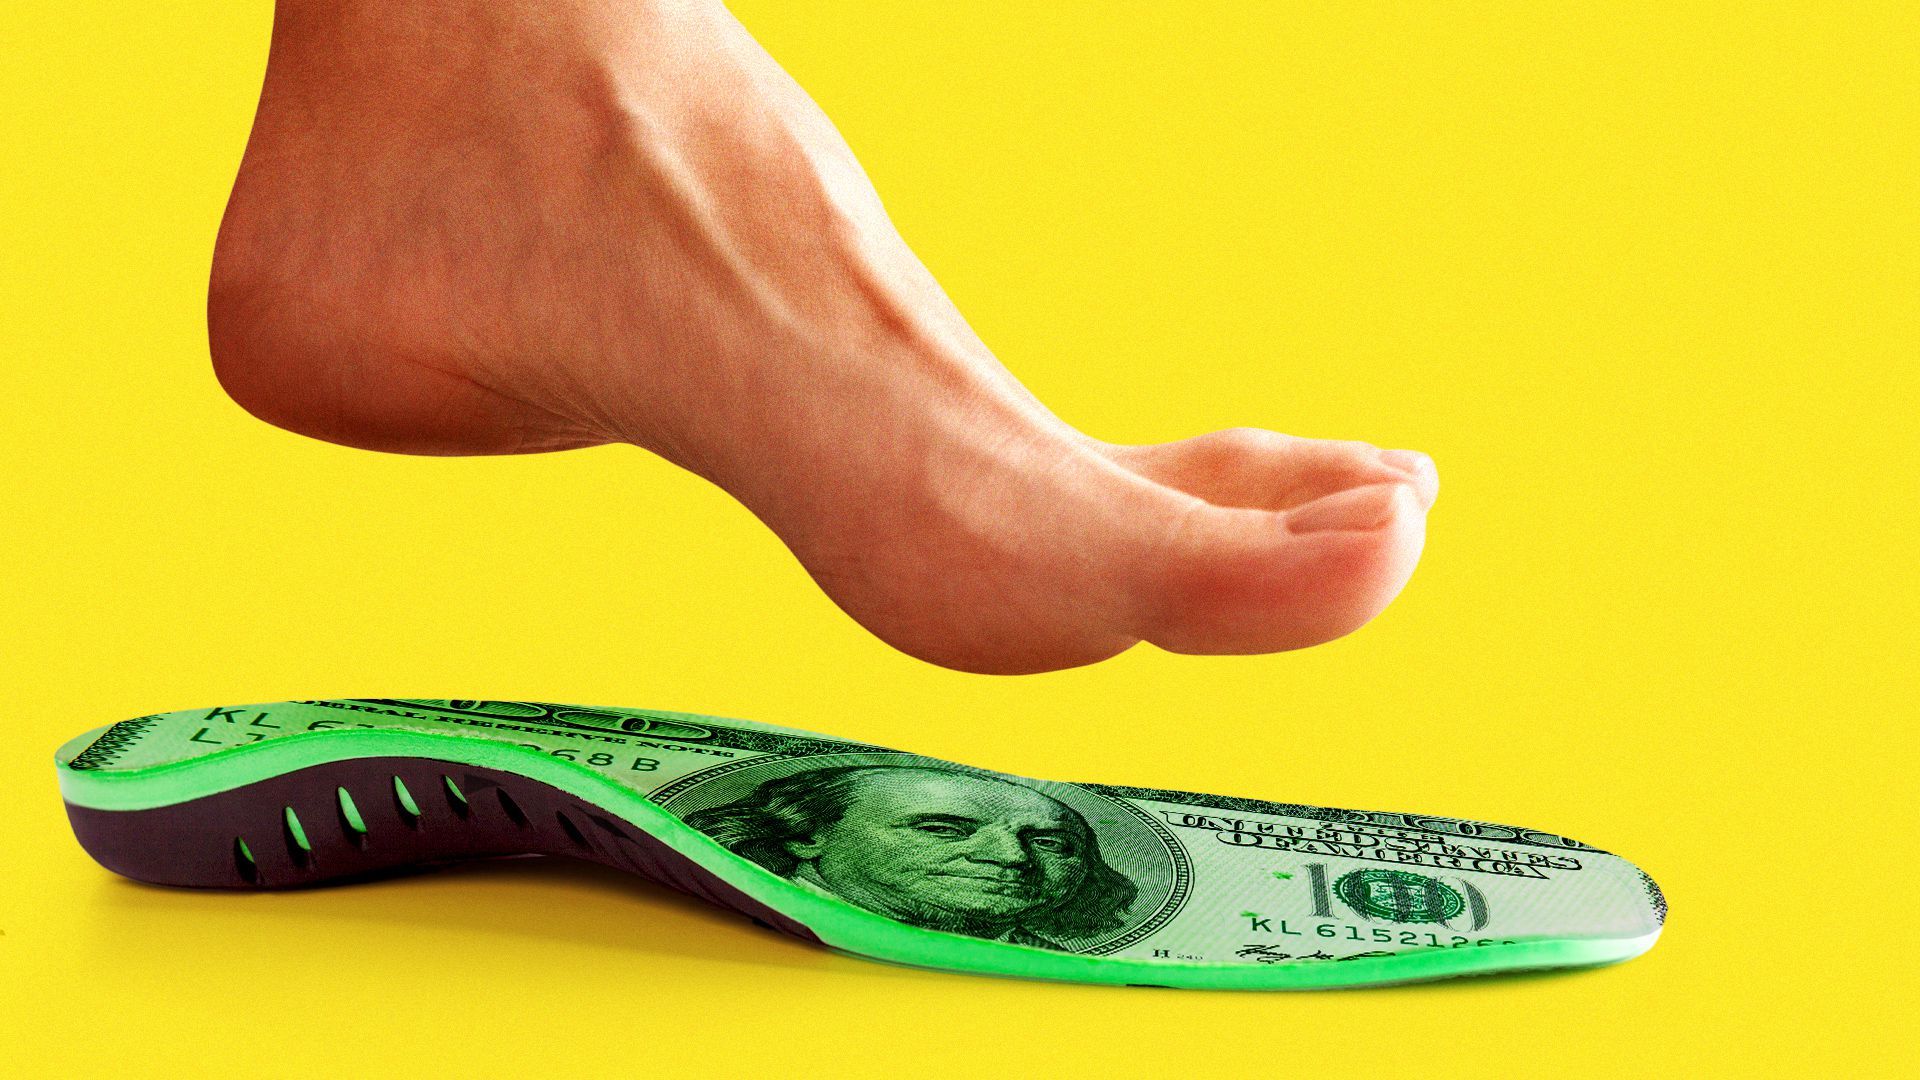 Illustration of a foot stepping on to an orthotic made from money.